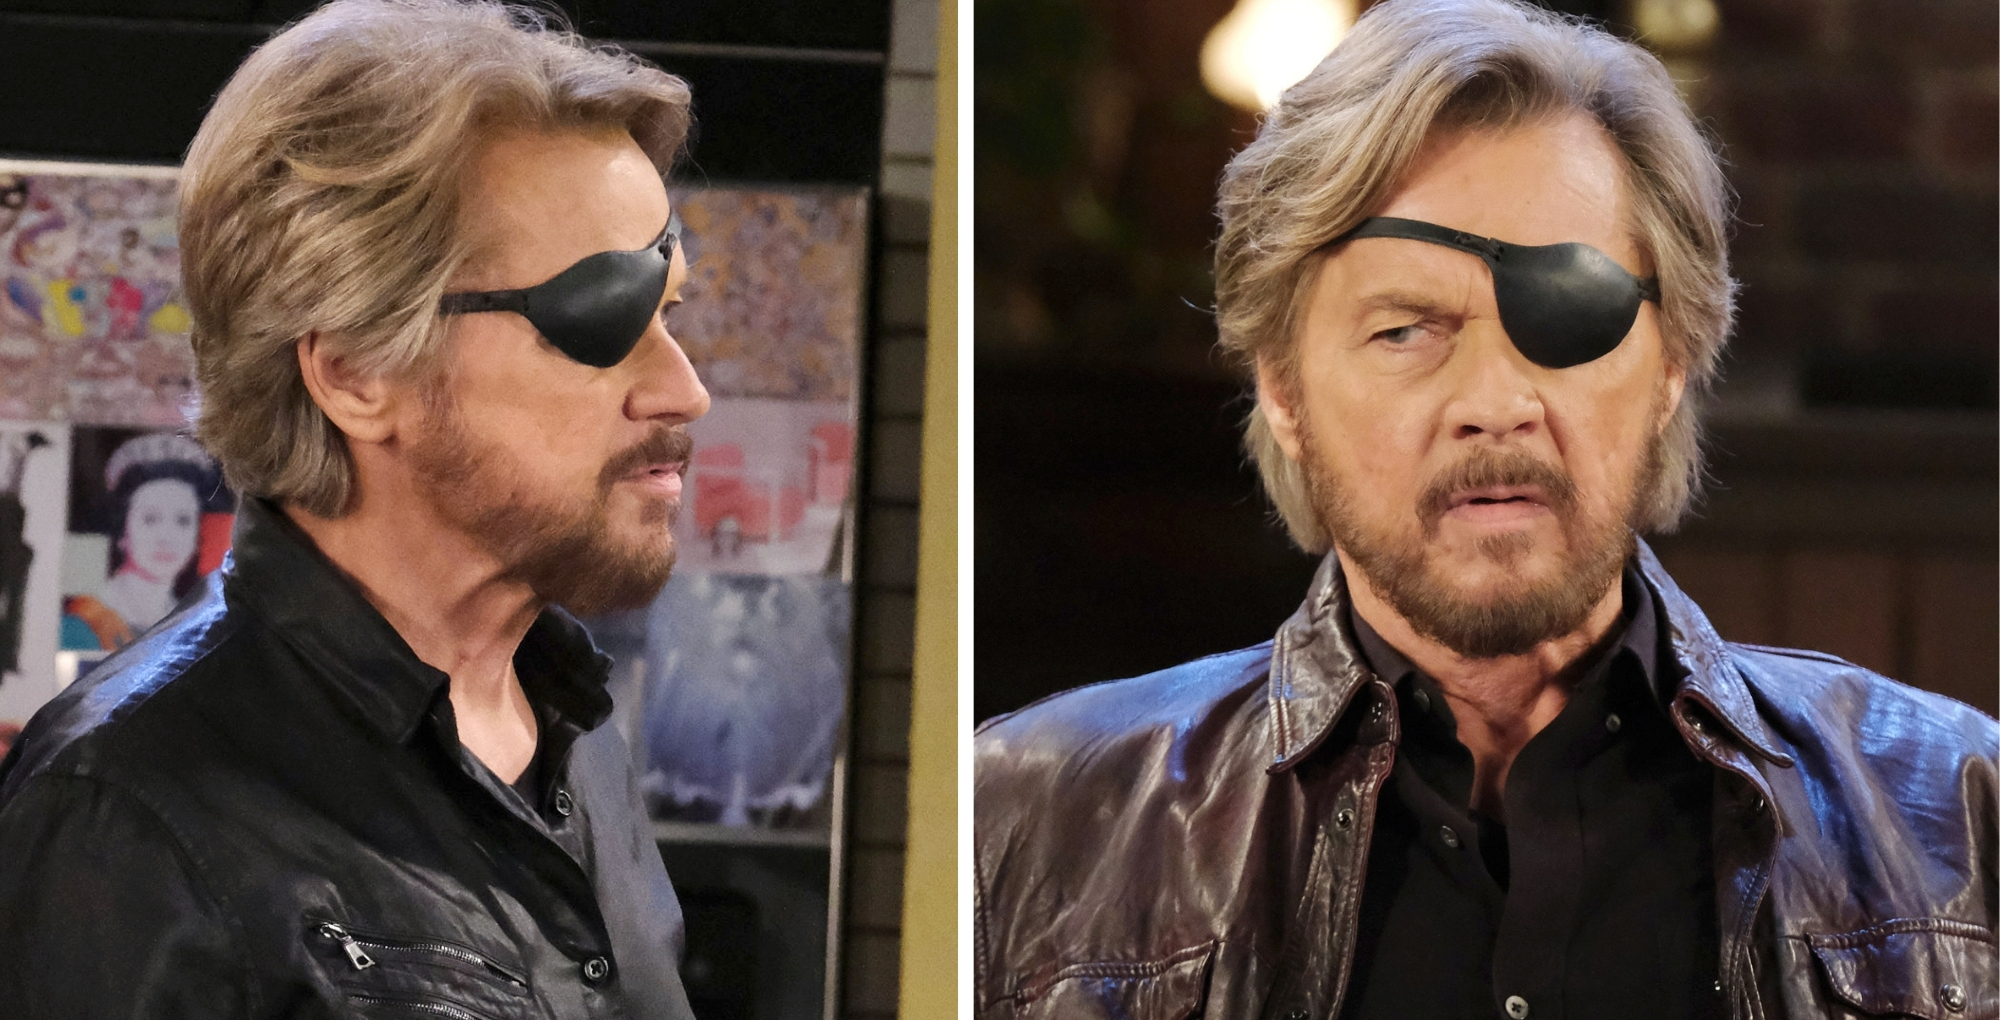 Days of our Lives spoilers for Tuesday, March 12 feature Steve coming to the rescue.